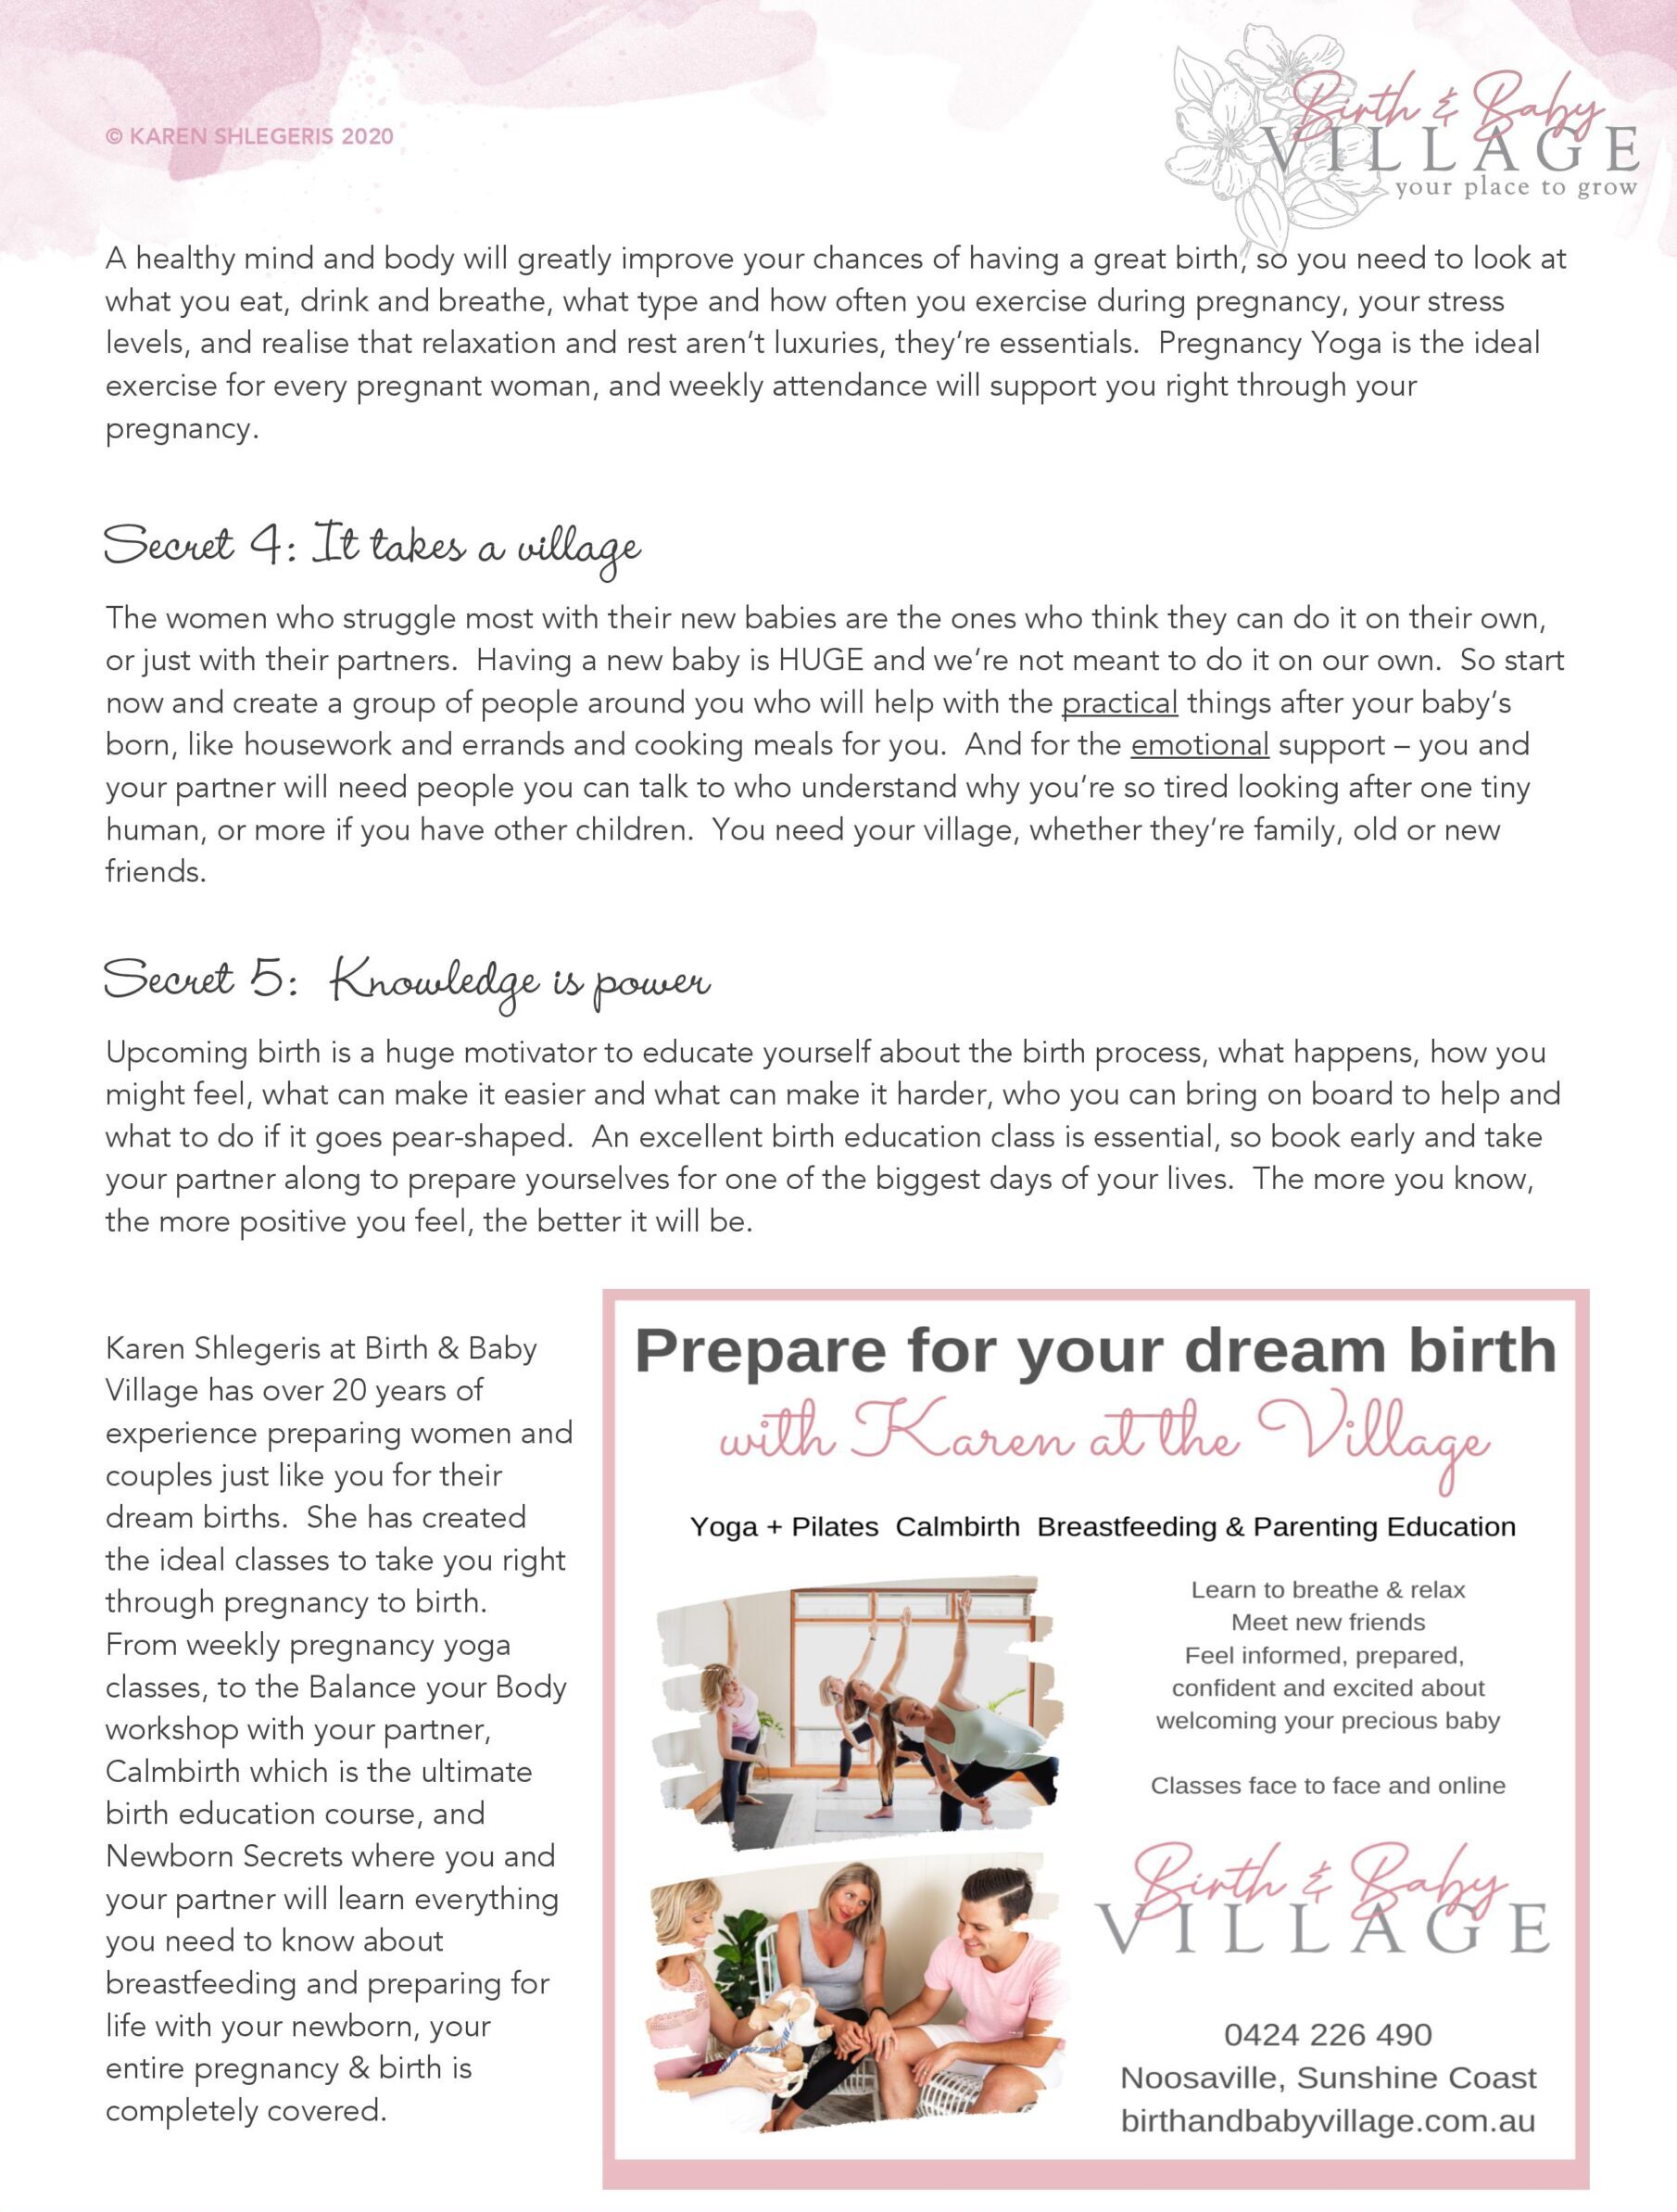 5 Secrets to the birth of your dreams